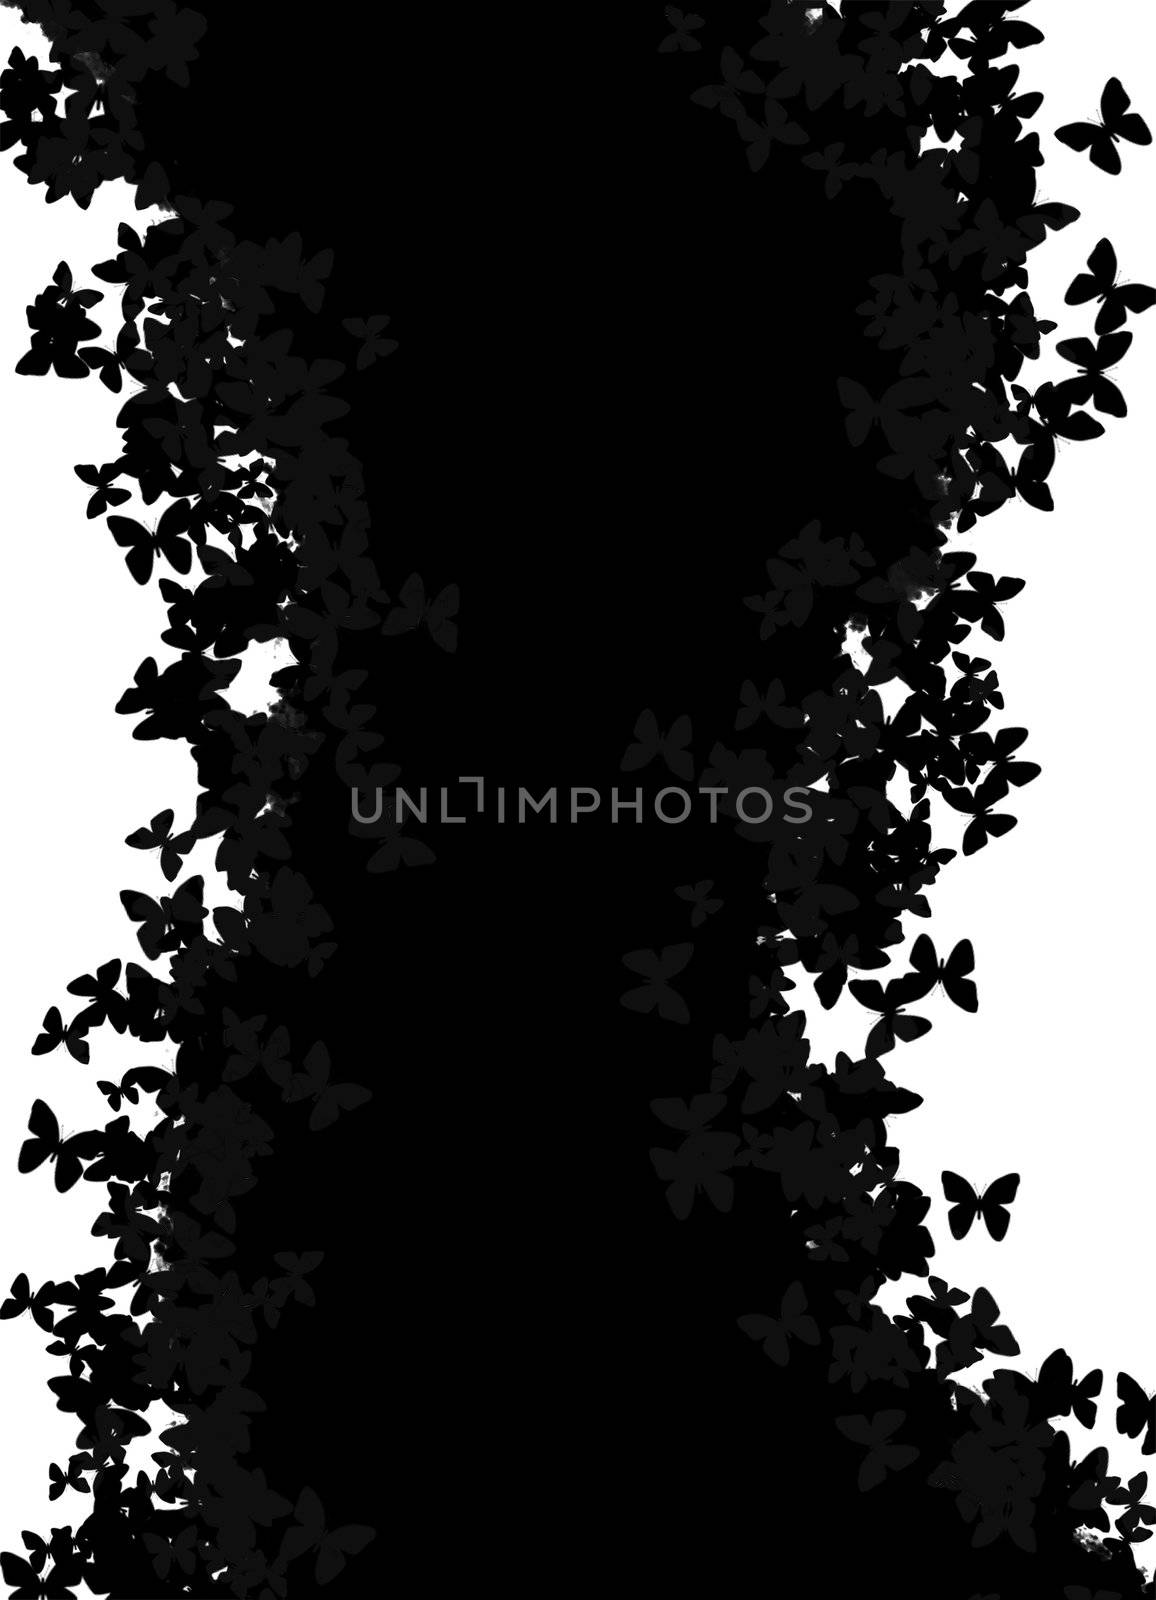 A black and white page layout with butterfly silhouettes.